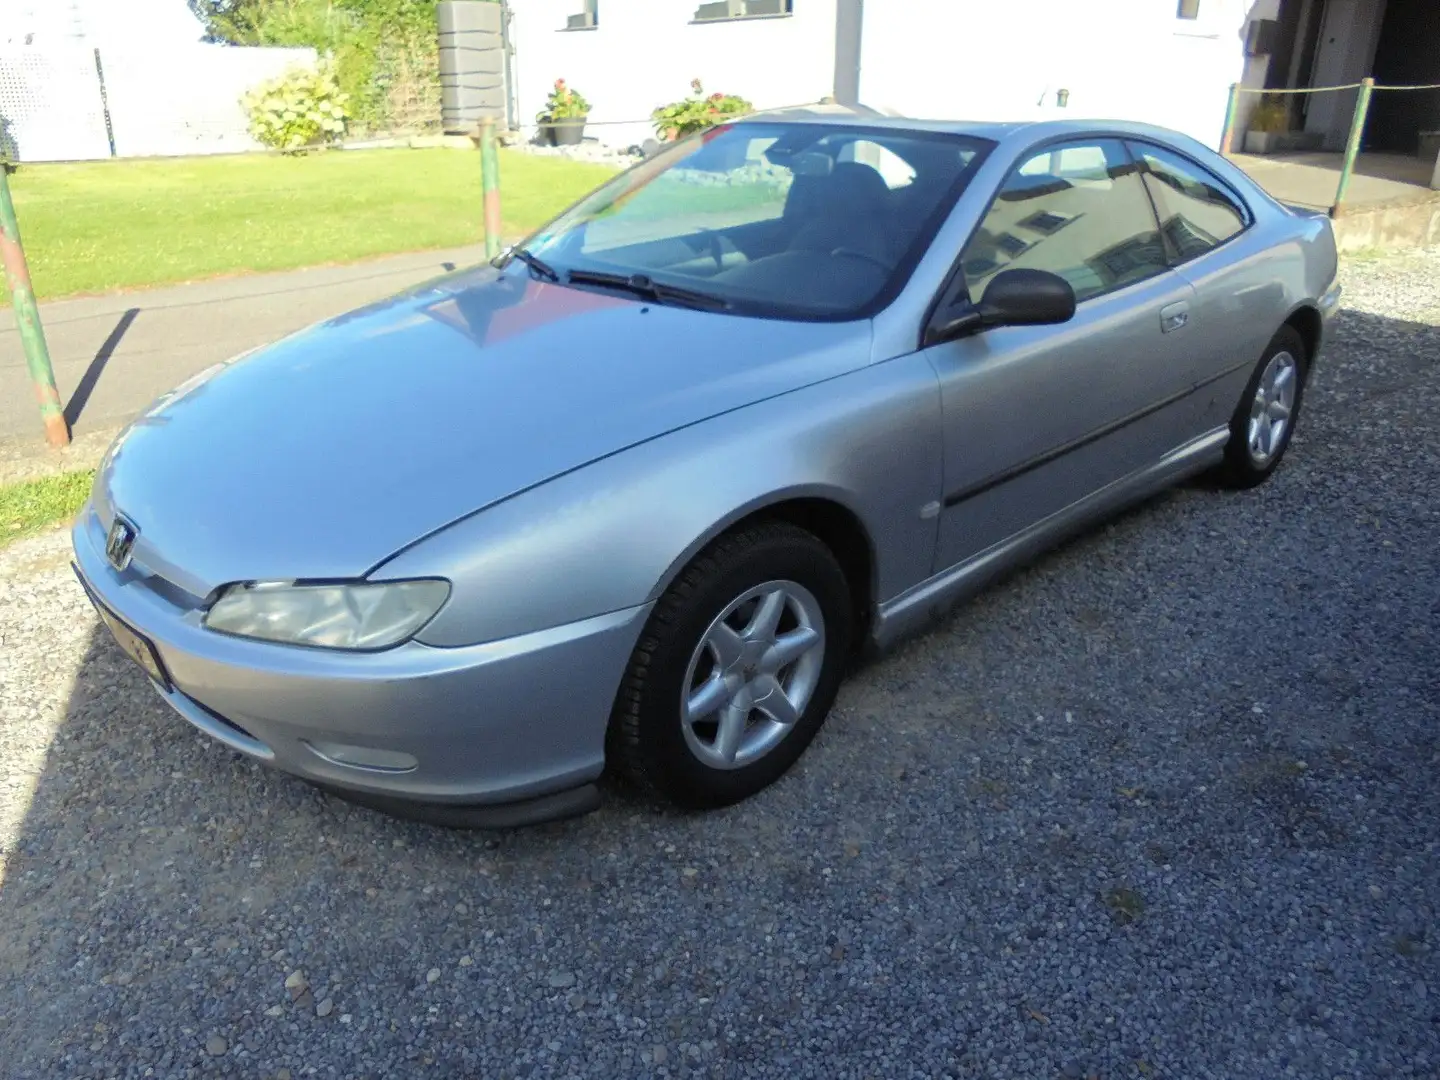 Peugeot 406 Coupe=1HAND= Silver - 2